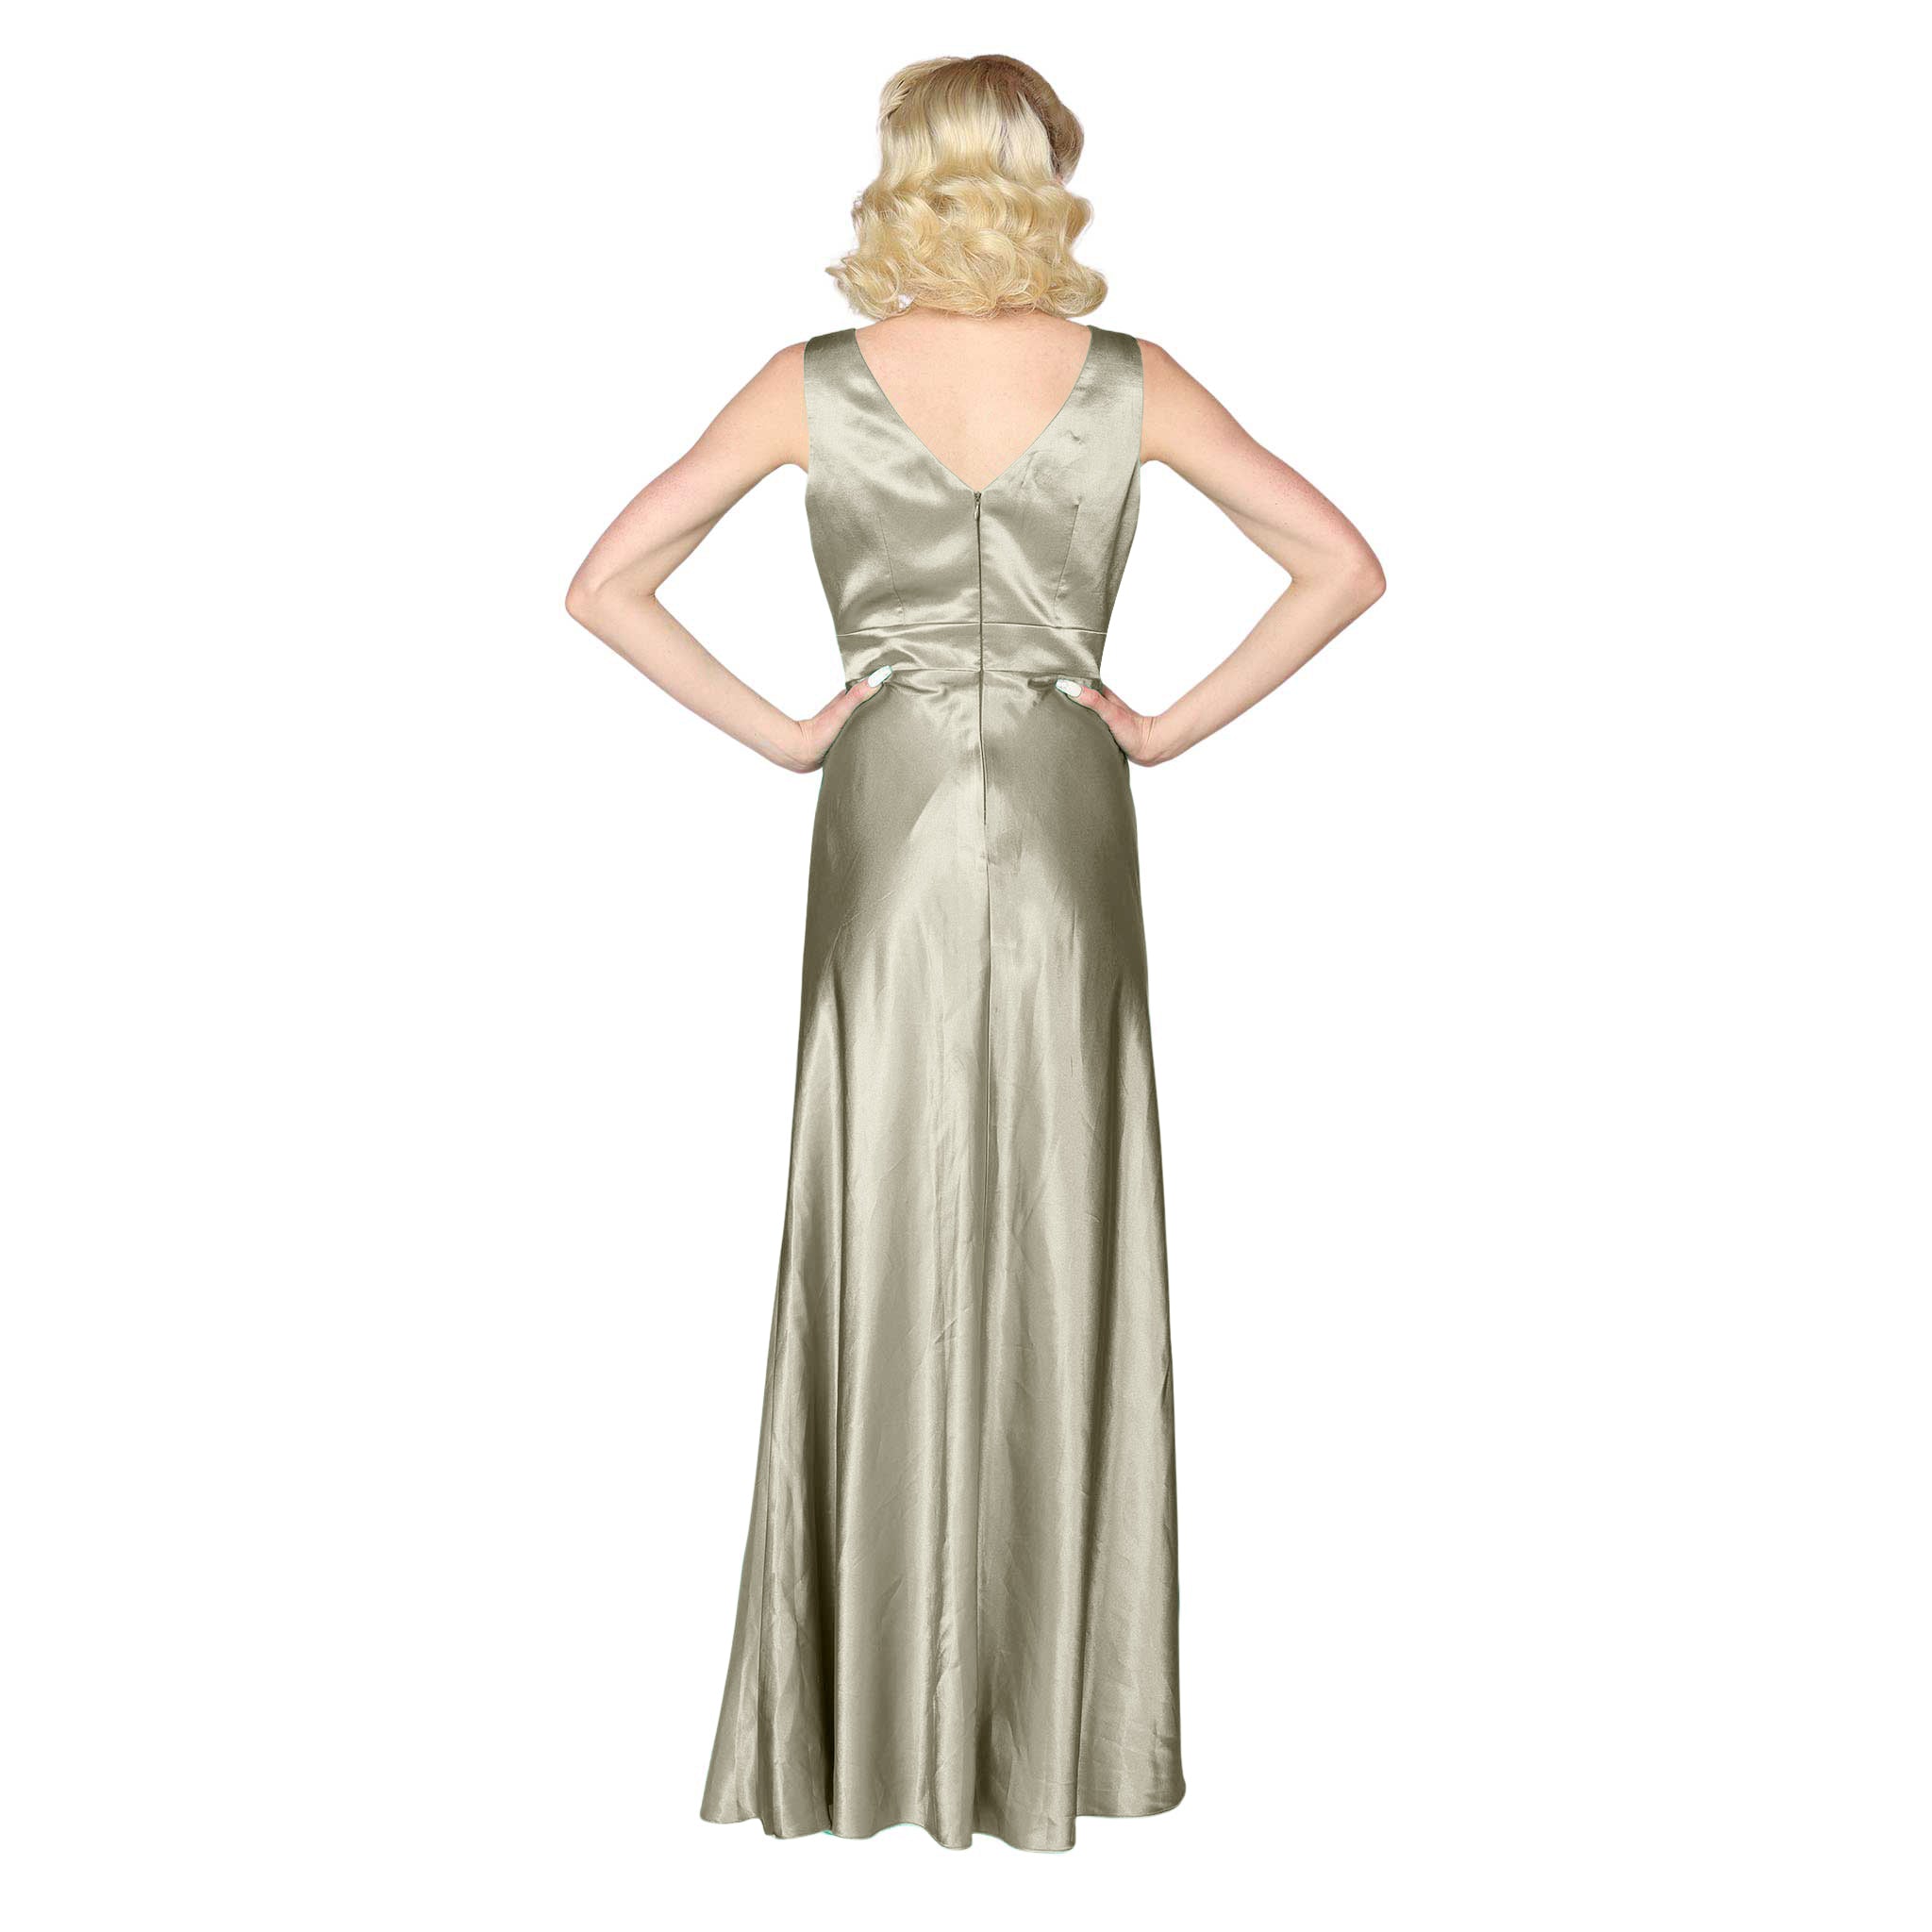 "Eve" Gown